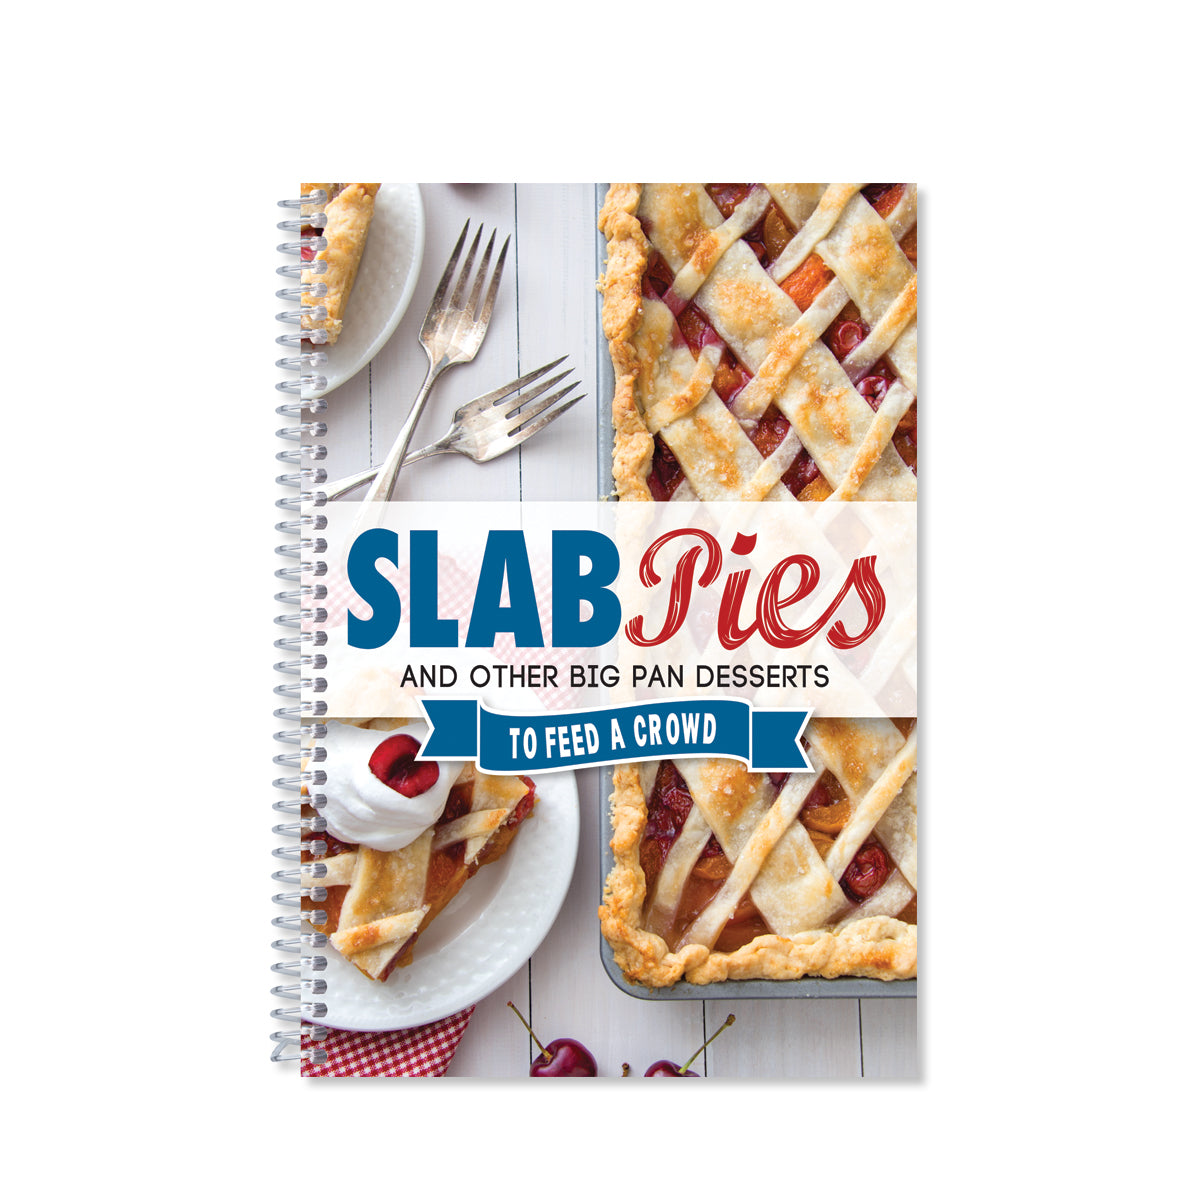 Cover of cookbook titled "Slab Pies - And Other Big Pan Desserts to Feed a Crowd. 